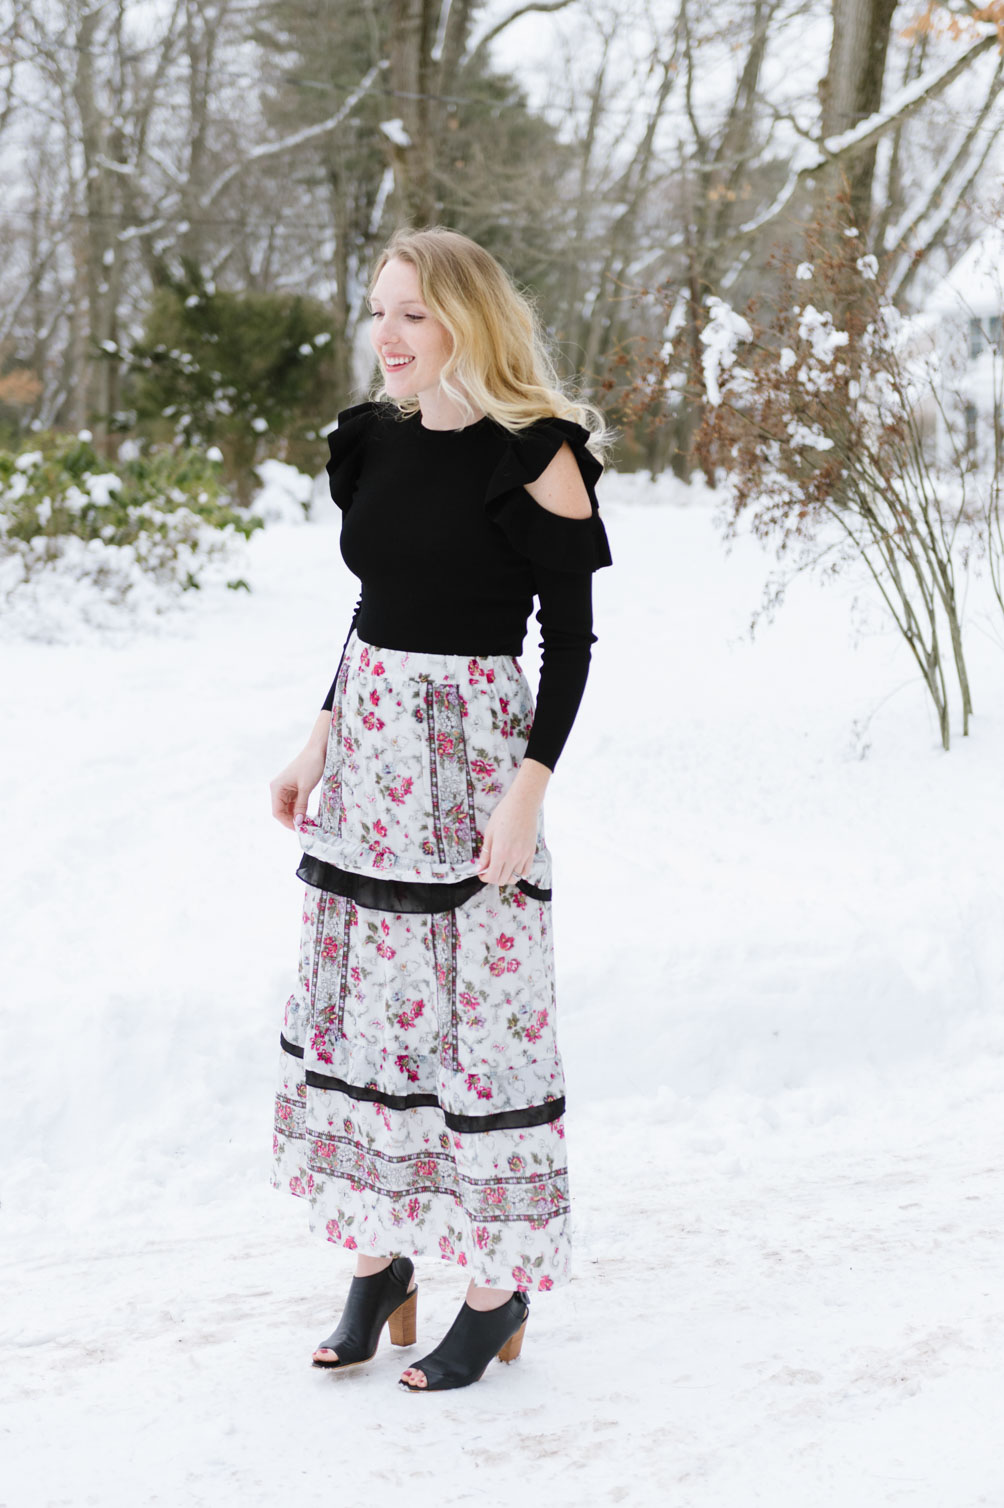 styling a floral maxi skirt and ruffle cold shoulder top from the Club Monaco NYFW Collection